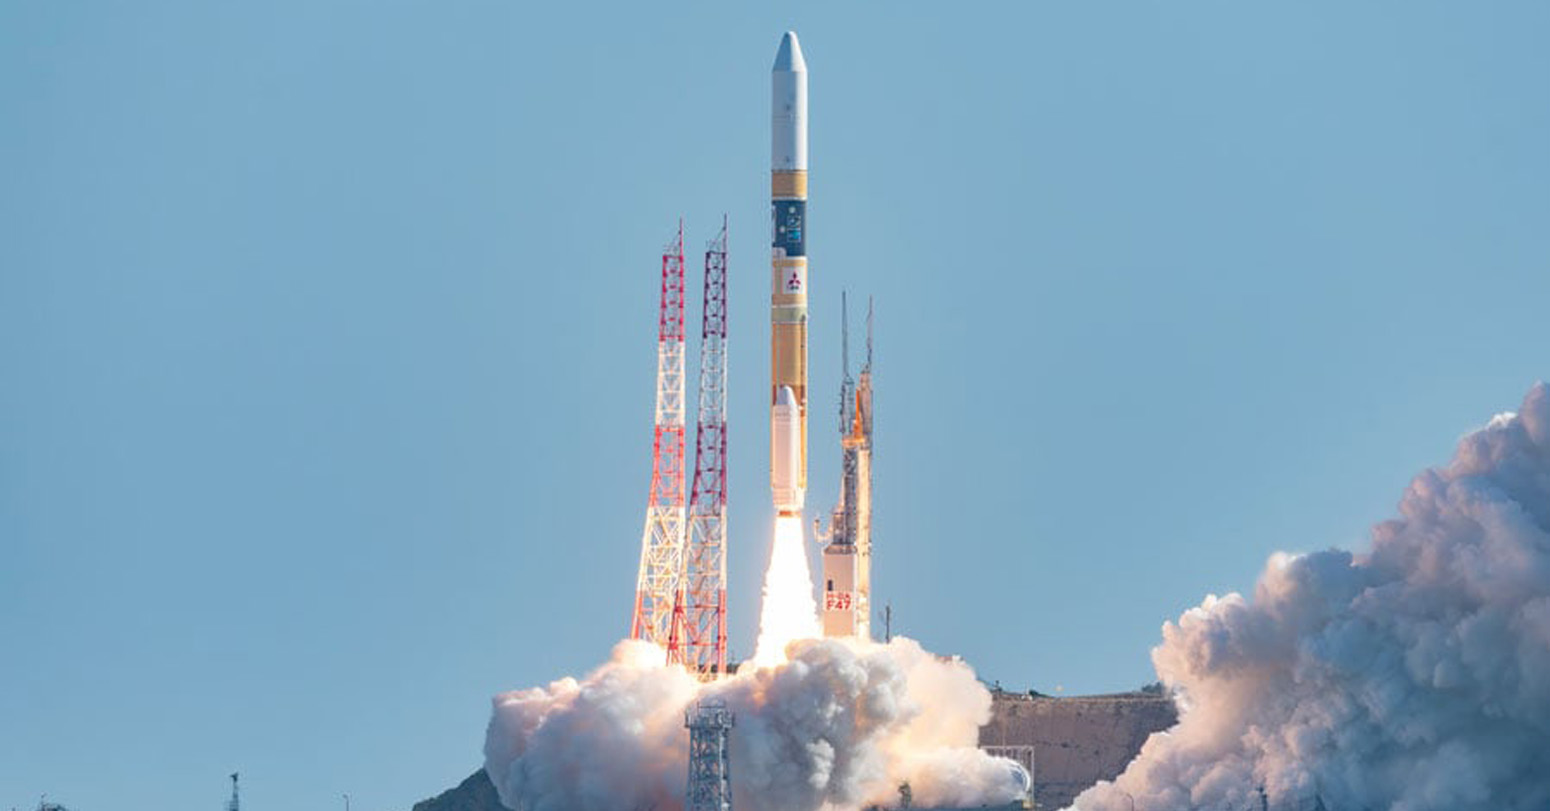 Japan Launches Rocket Carrying Lunar Lander, X-Ray Telescope To Explore Origins Of Universe